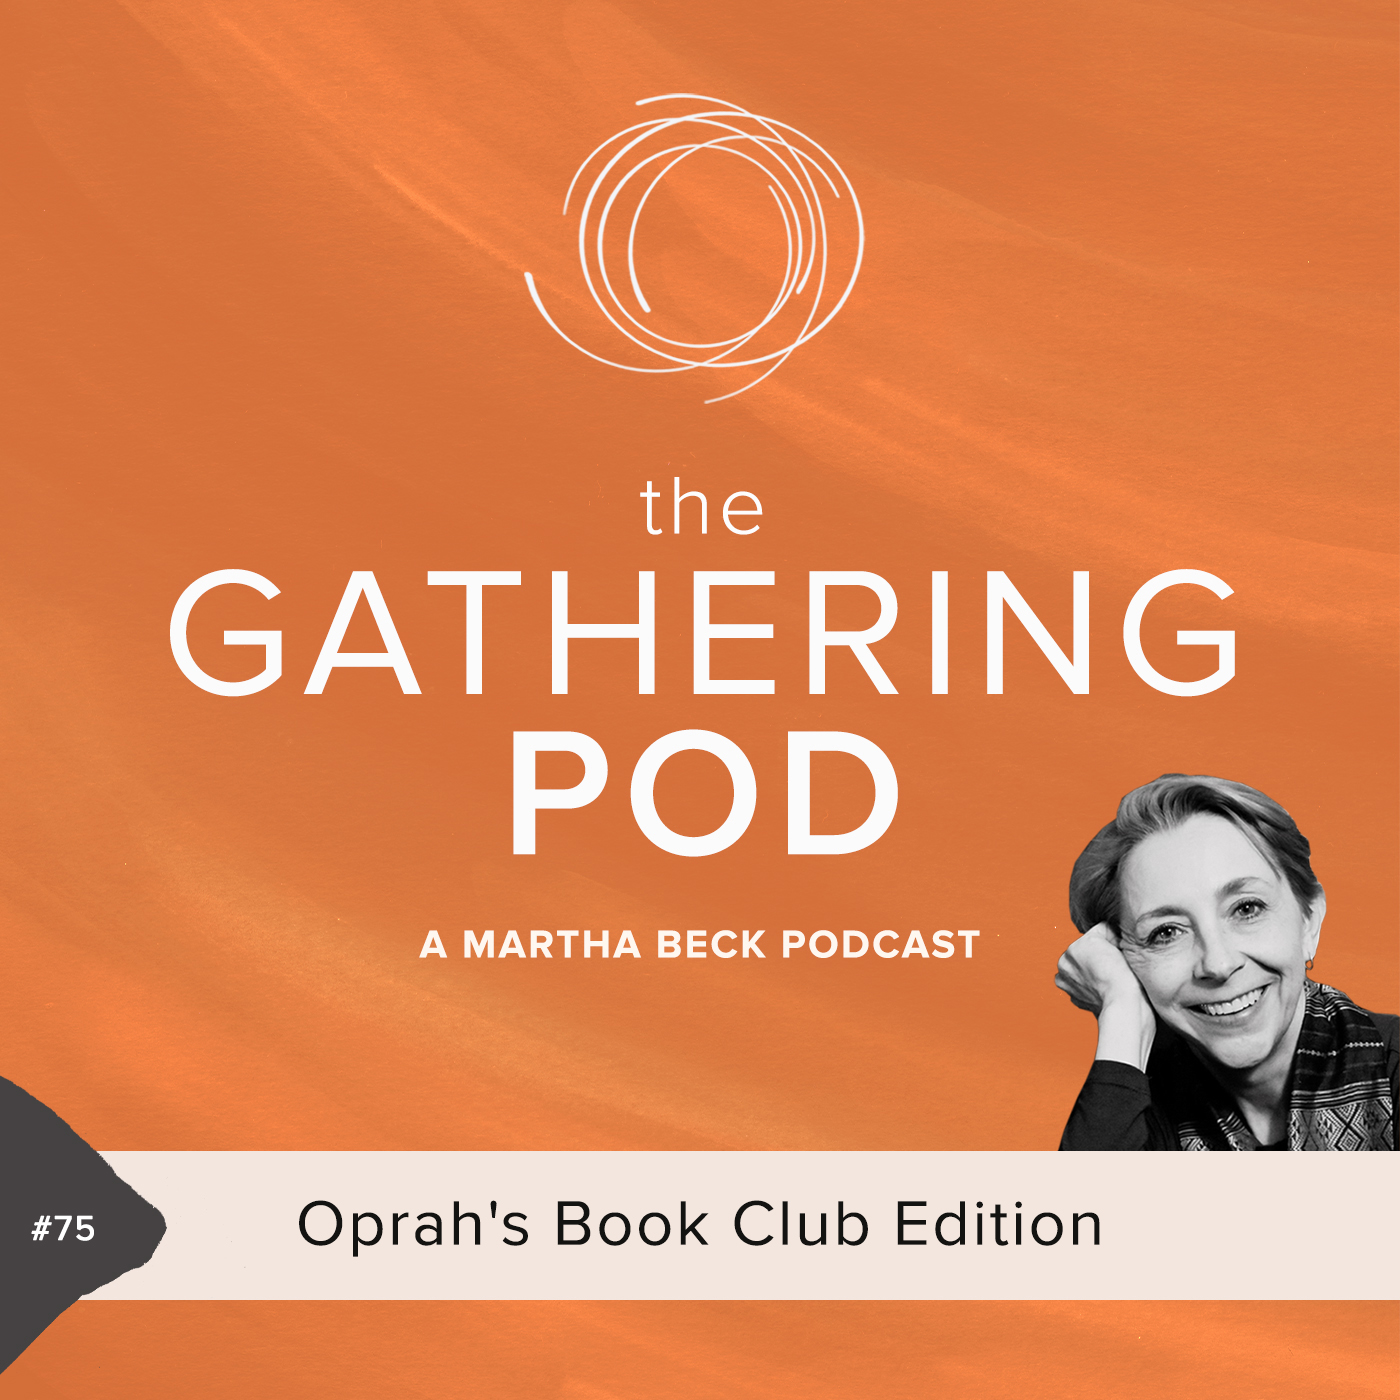 Image for The Gathering Pod A Martha Beck Podcast Episode #75 Oprah’s Book Club Edition